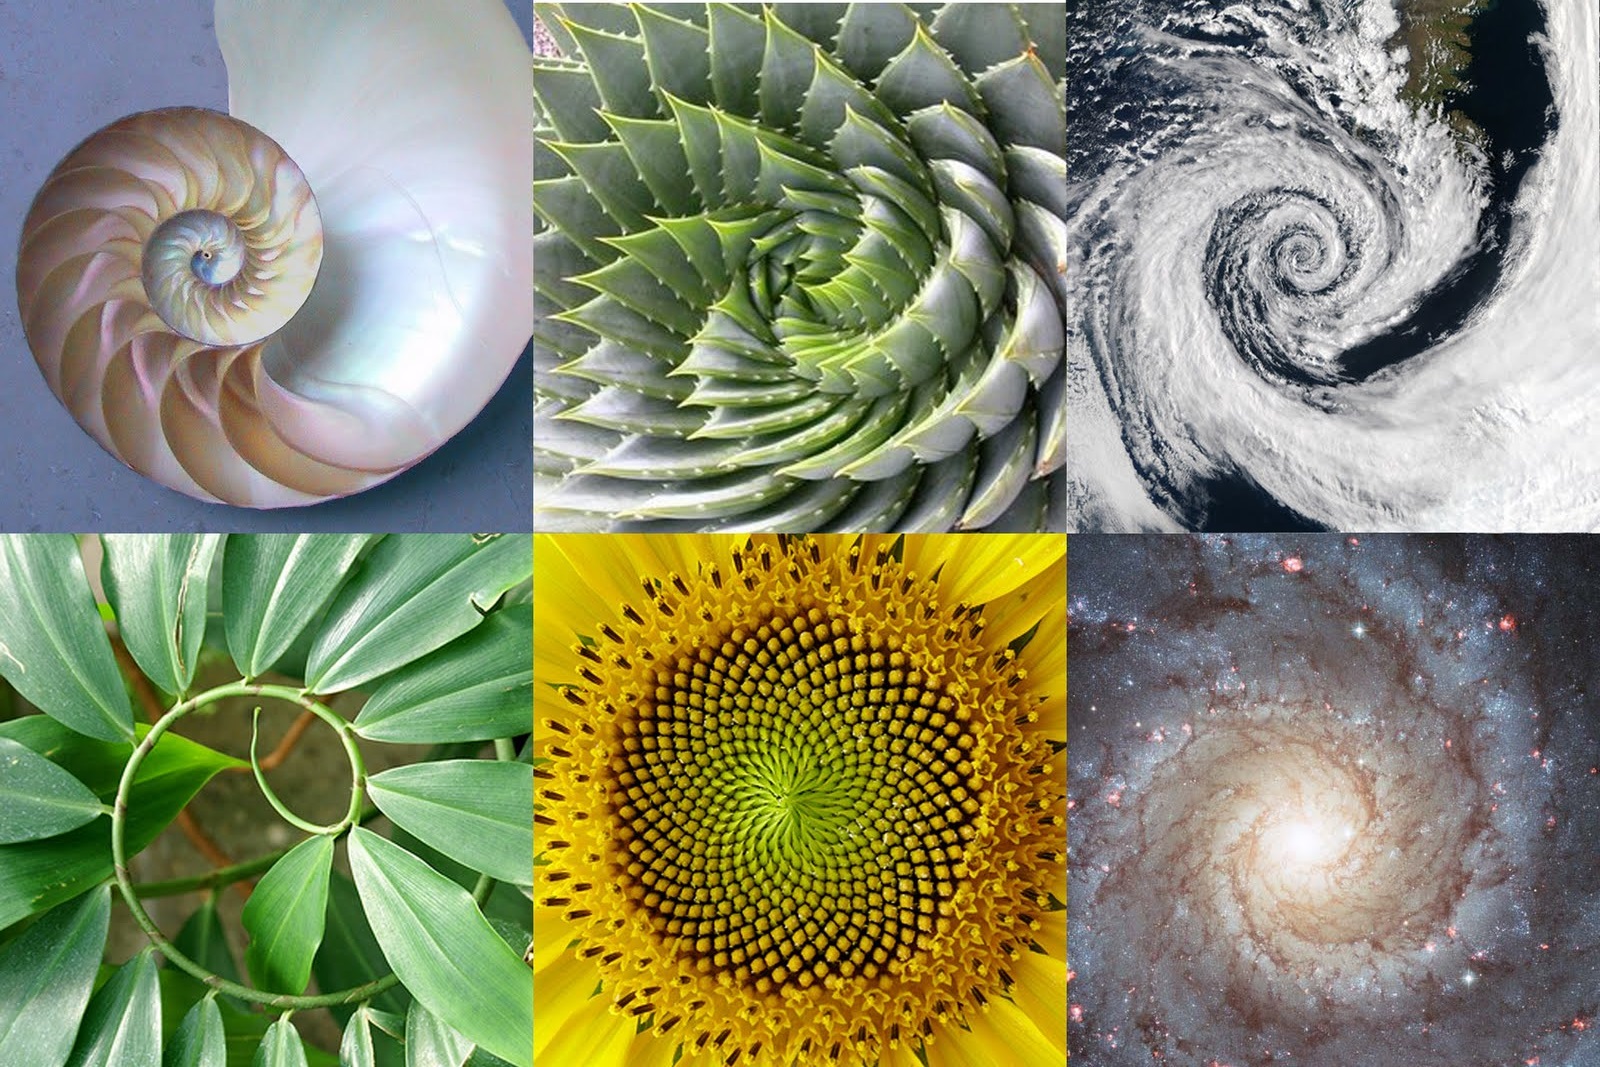 Exponential Evolution - DNA Activation and 'The Golden Ratio' - in nature